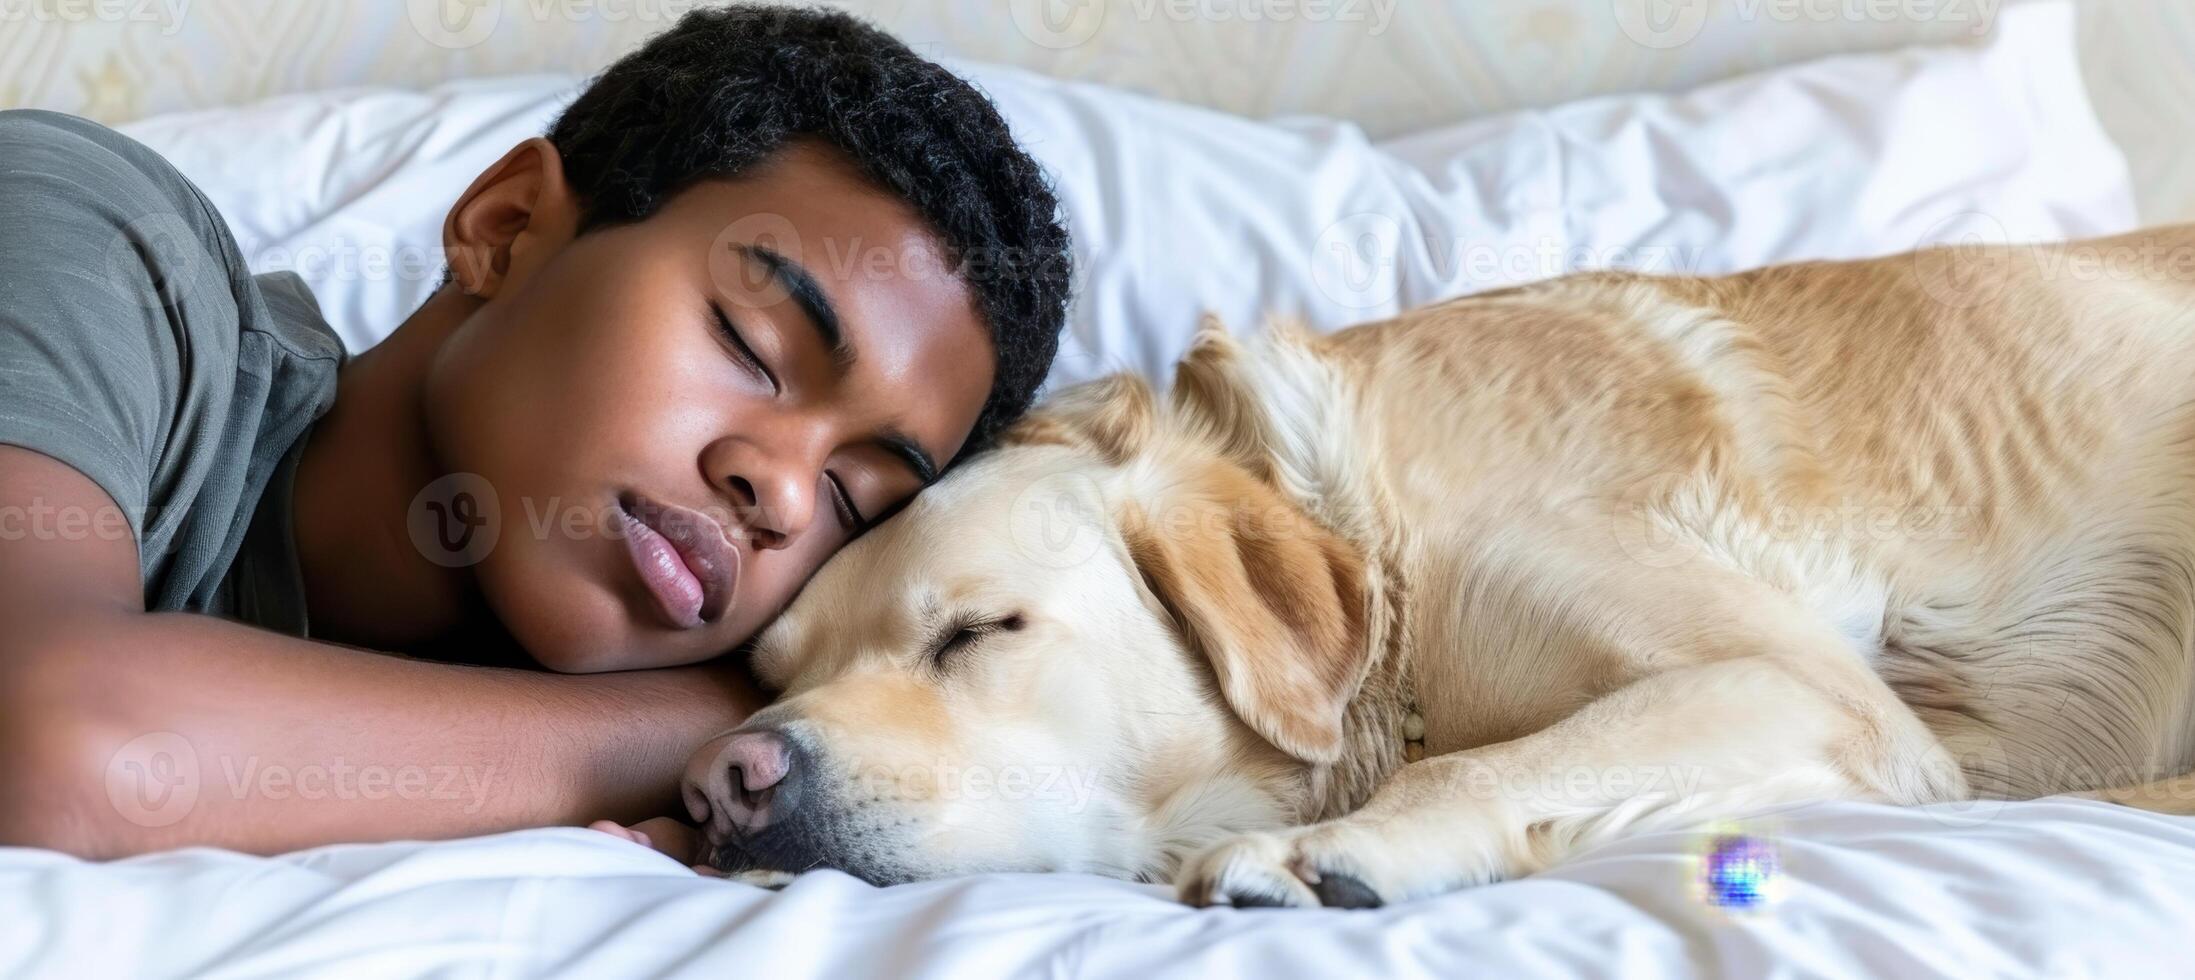 Young man and dog peacefully sleeping together on a white bed in a cozy home setting photo